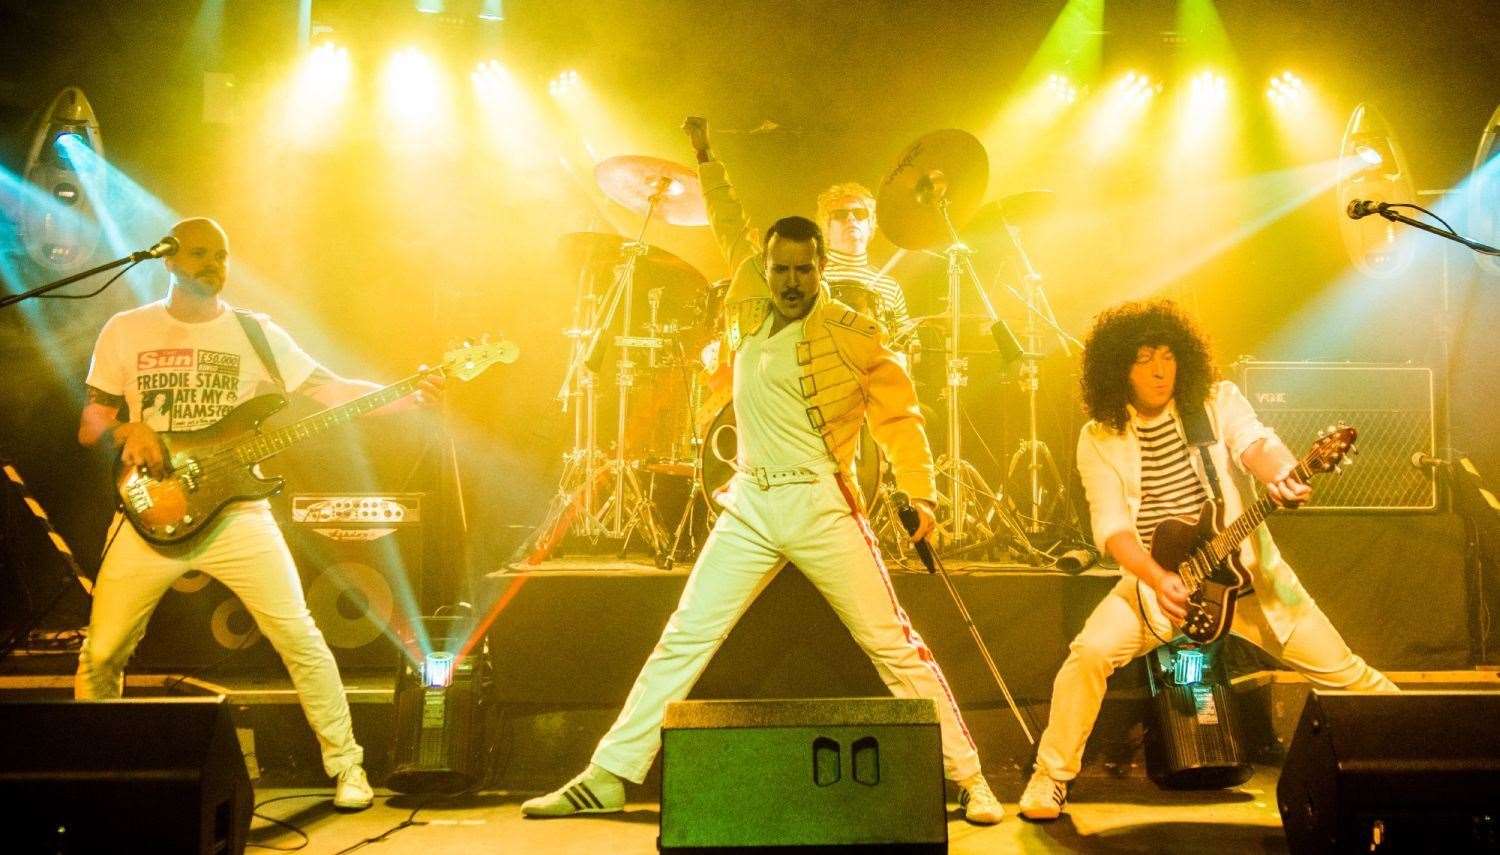 Pure Queen tribute band perform as Freddie Mercury and the gang